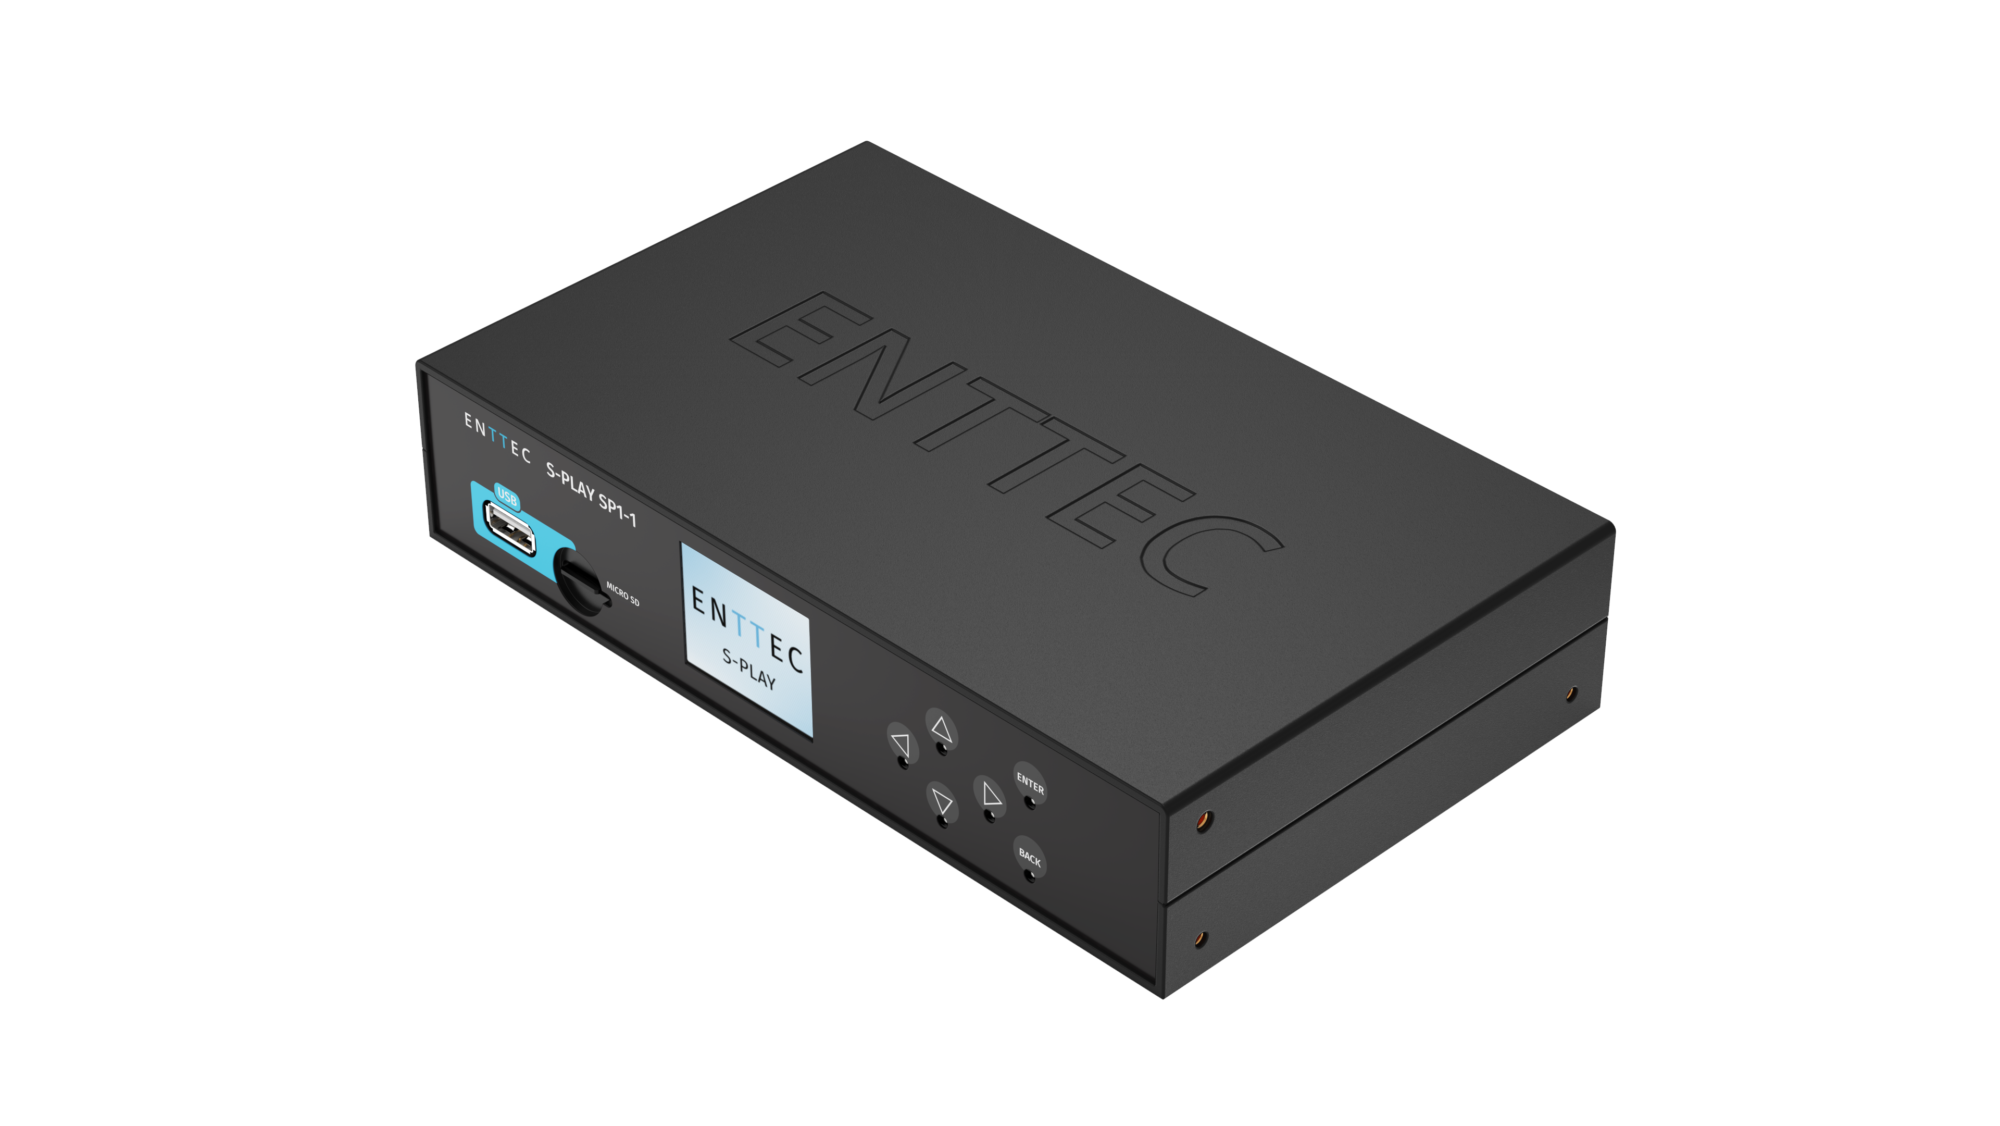 ENTTEC S-Play DMX, ArtNet and sACN lighting controller with show creation and record functionality.
show controller